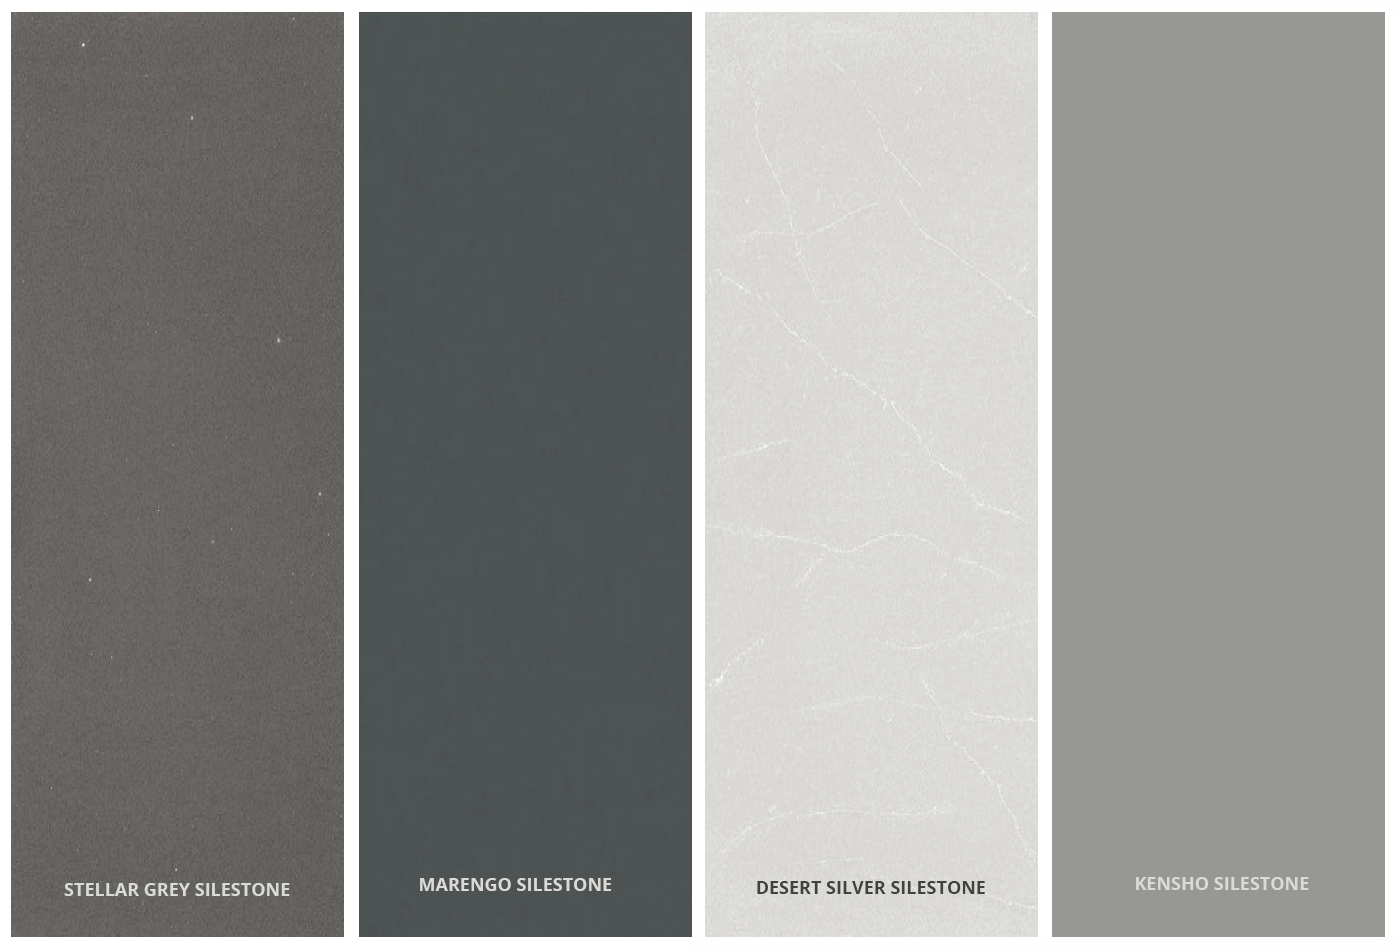 Bring Out Some Varieties of Silestone Stone